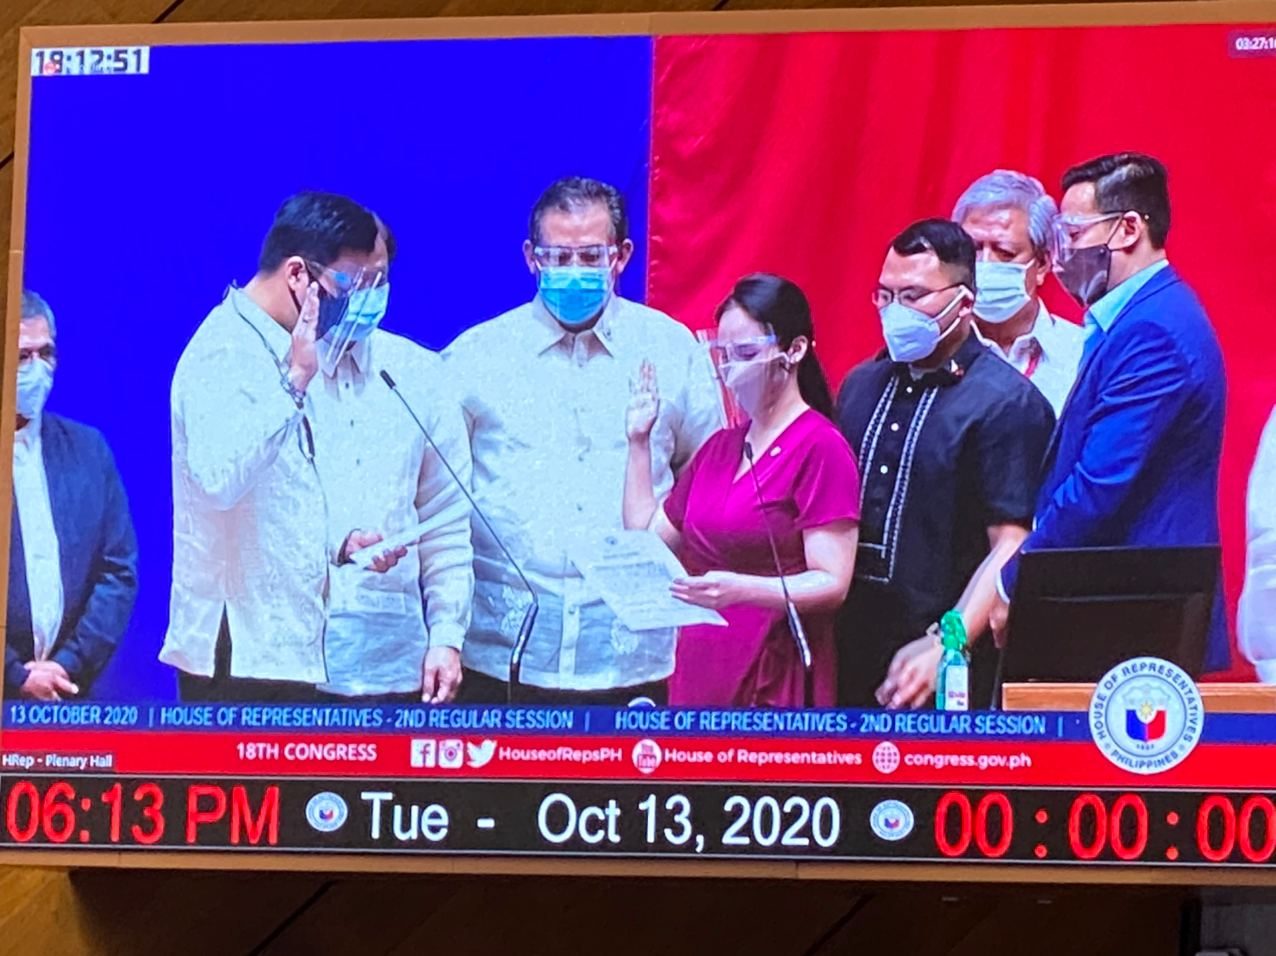 Controversial Ducielle Cardema of Duterte Youth joins House session